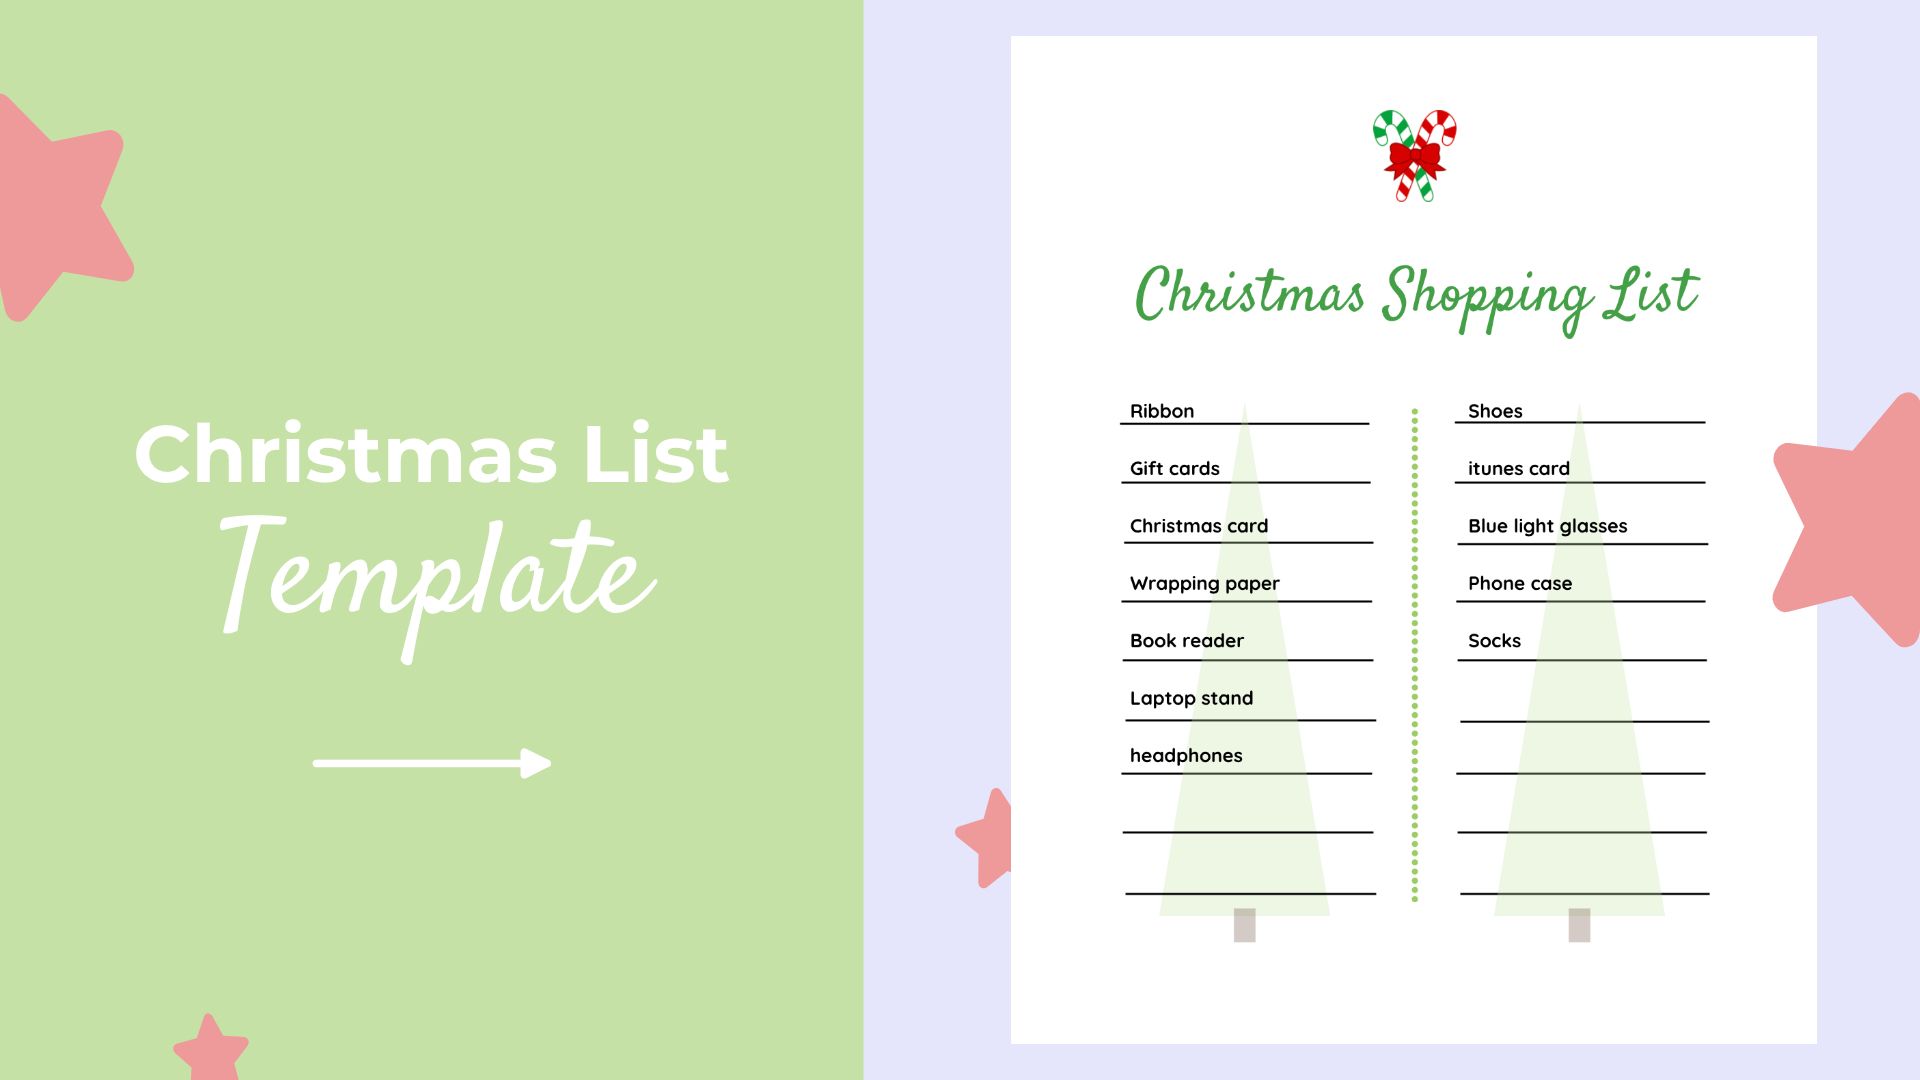 How to Create a Christmas List Online (Free Template)